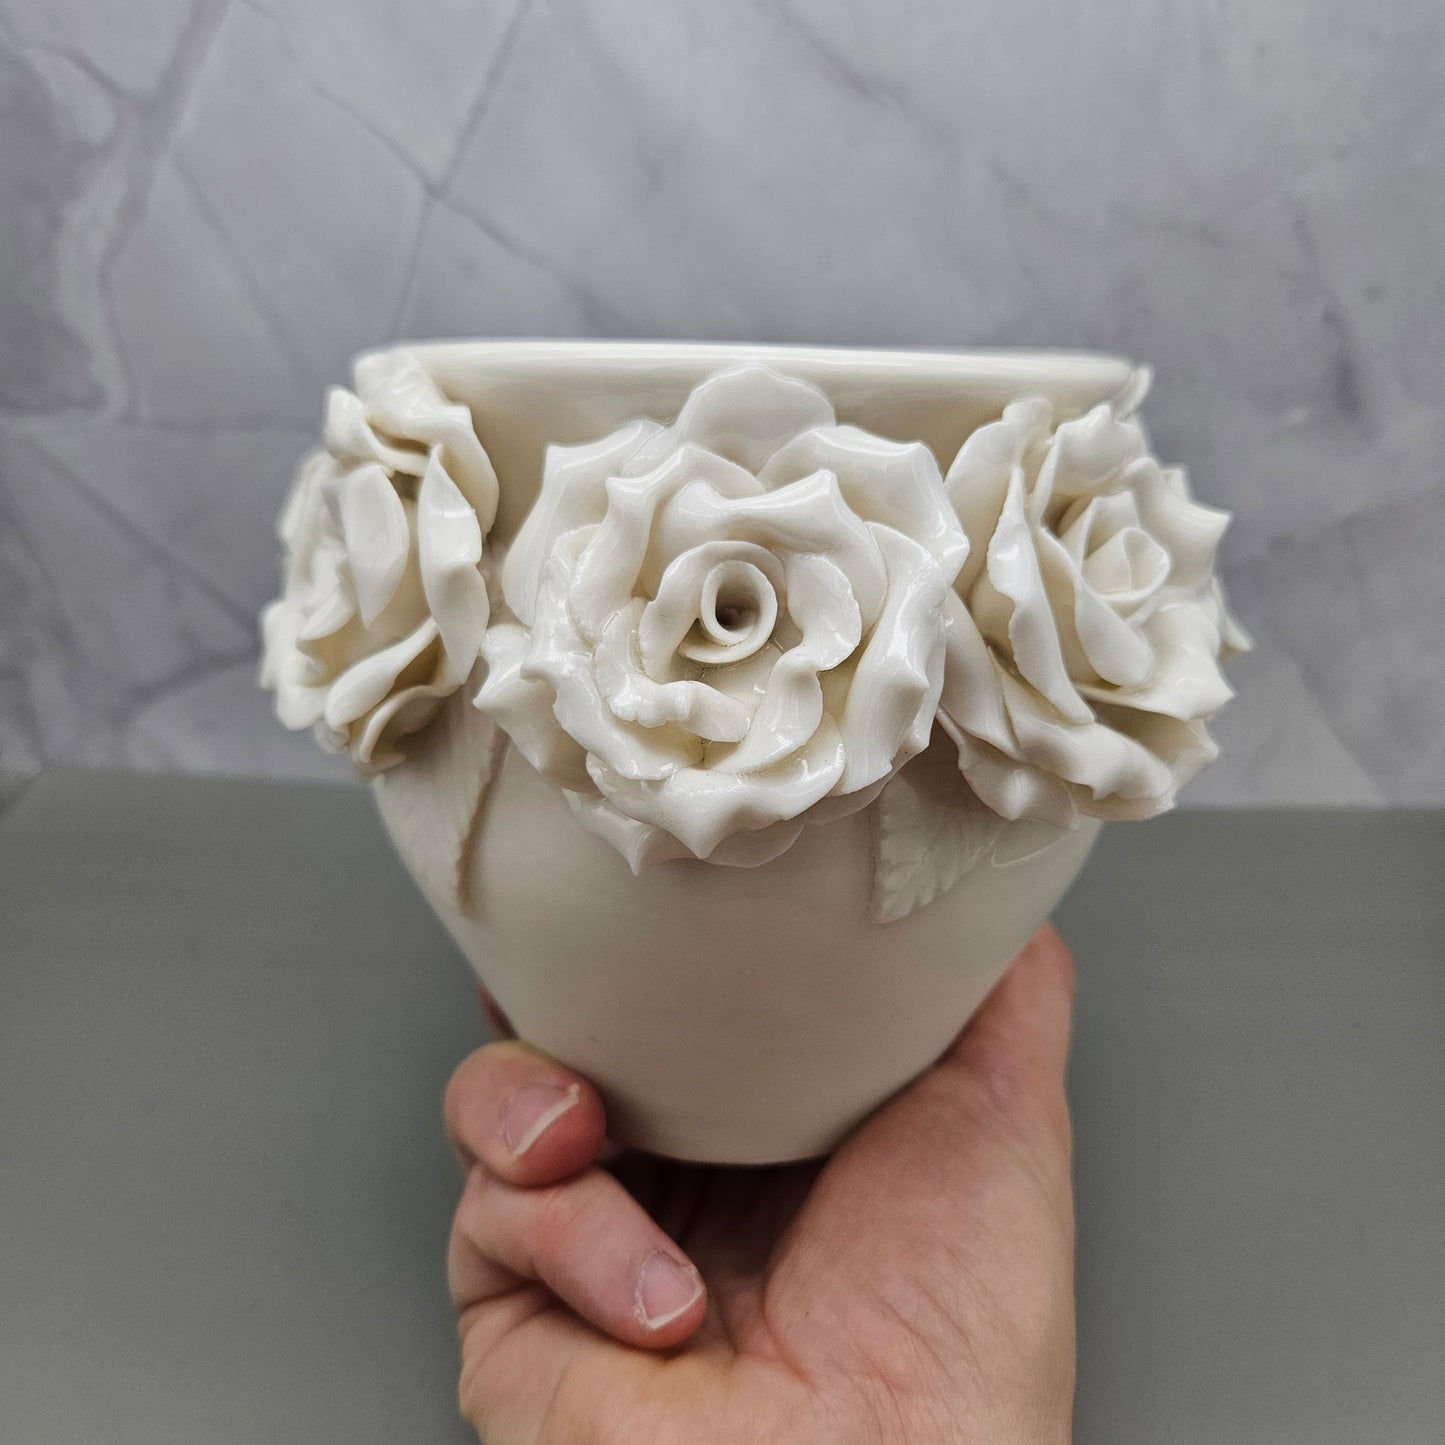 White Frost 4 inch tall rose vase